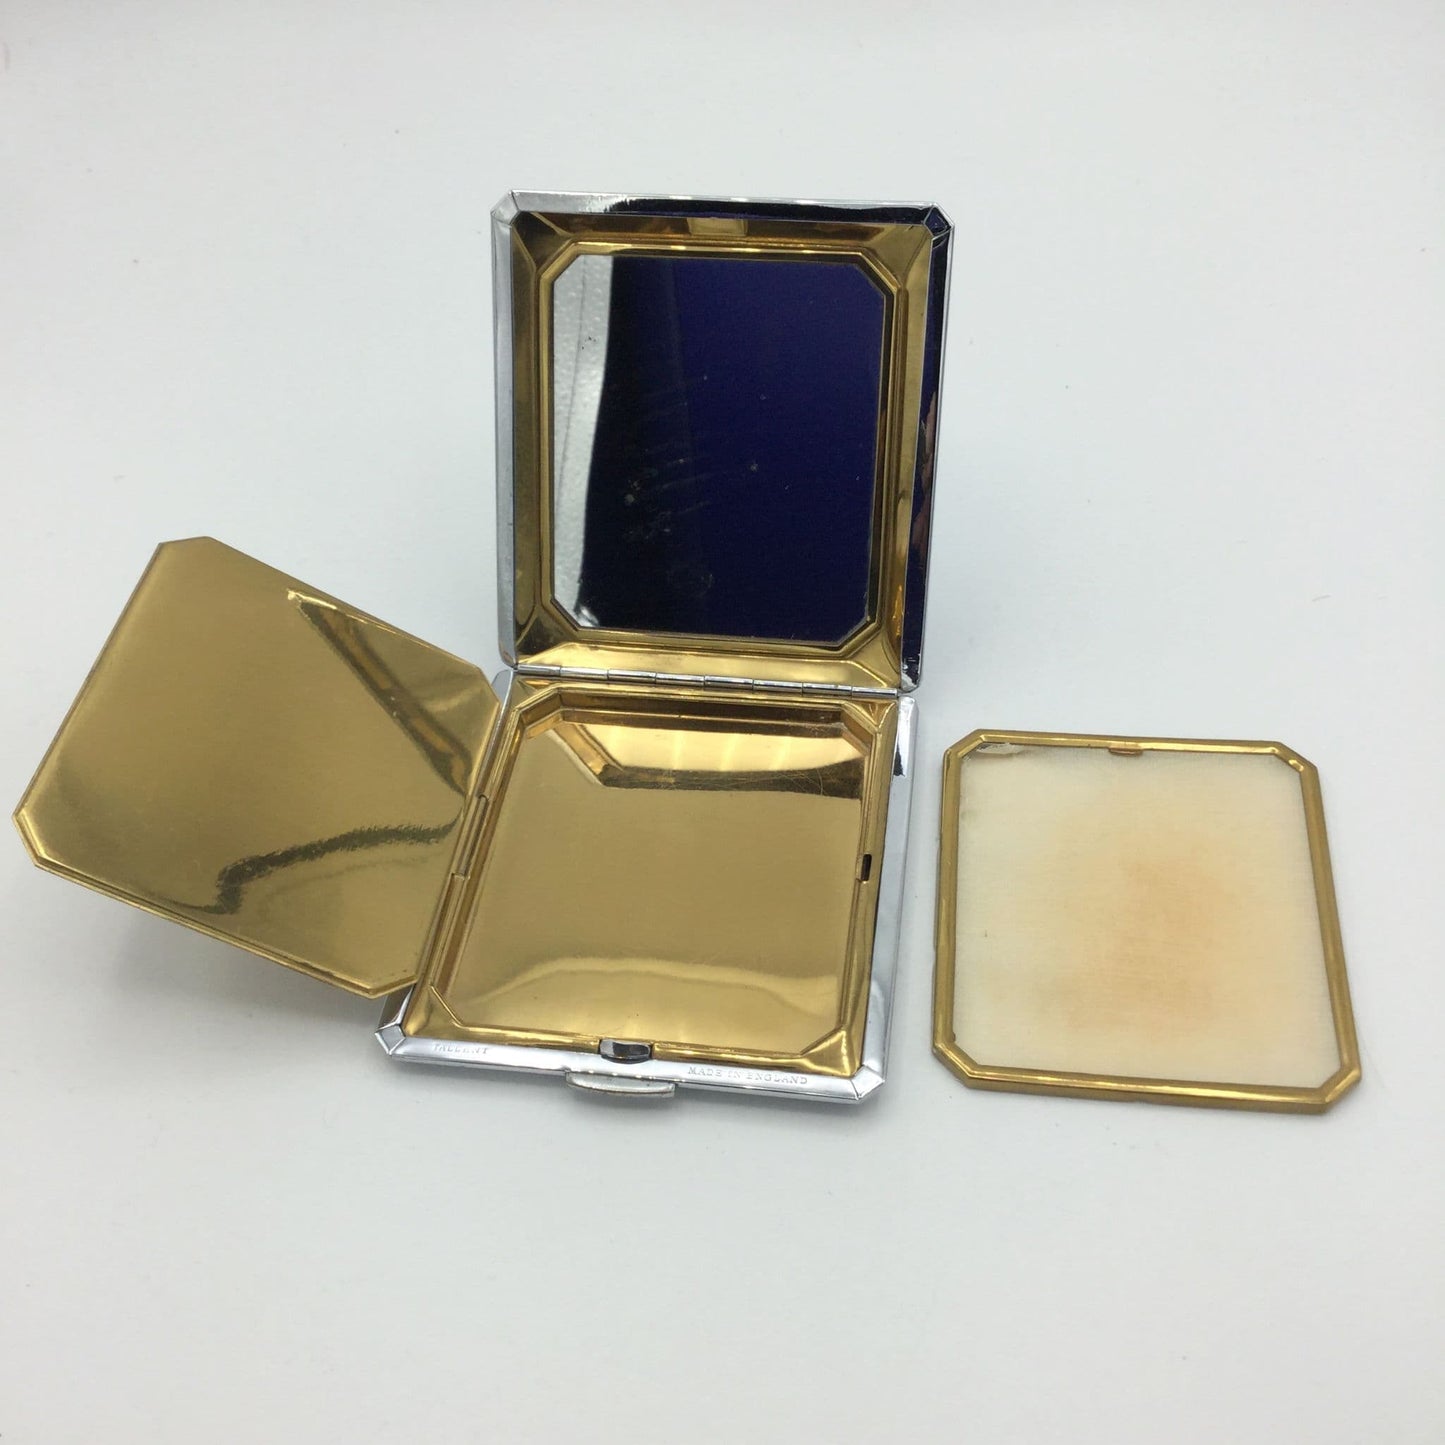 inside the powder compact showing the mirror, inner lid, golden interior and powder screen